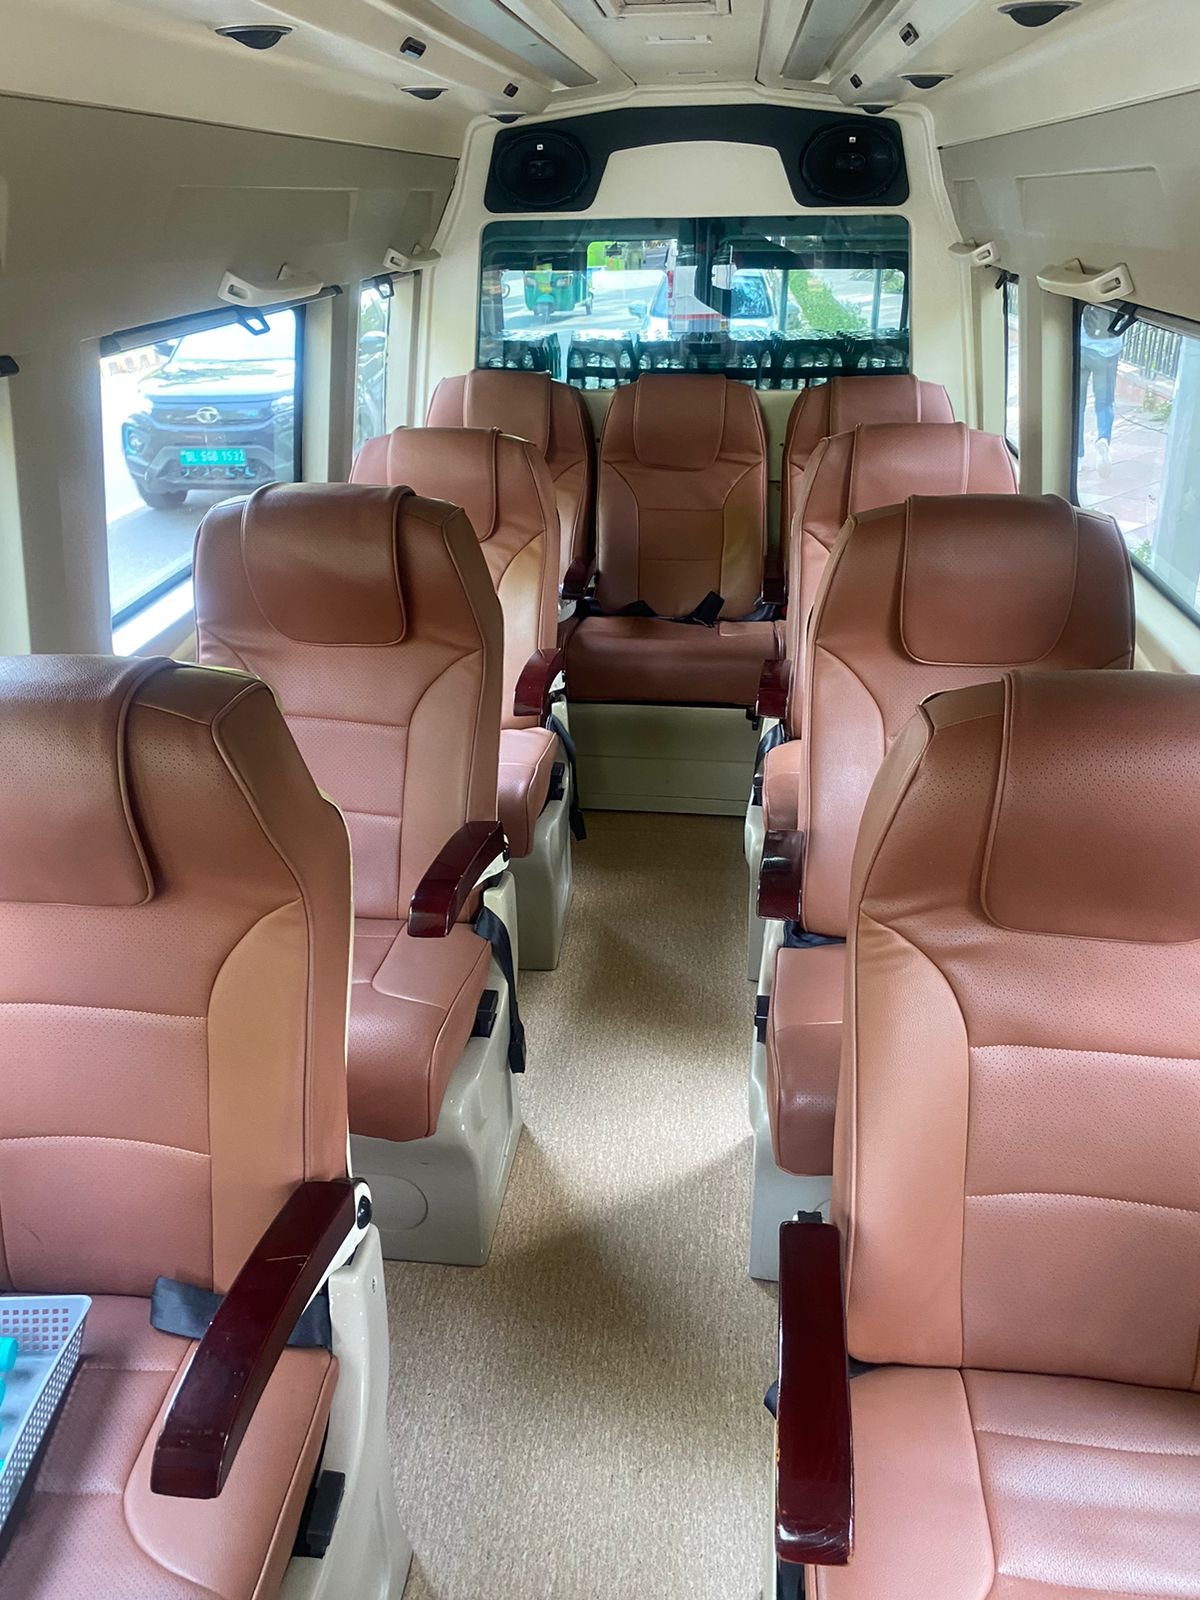 18 seater tempo traveller images